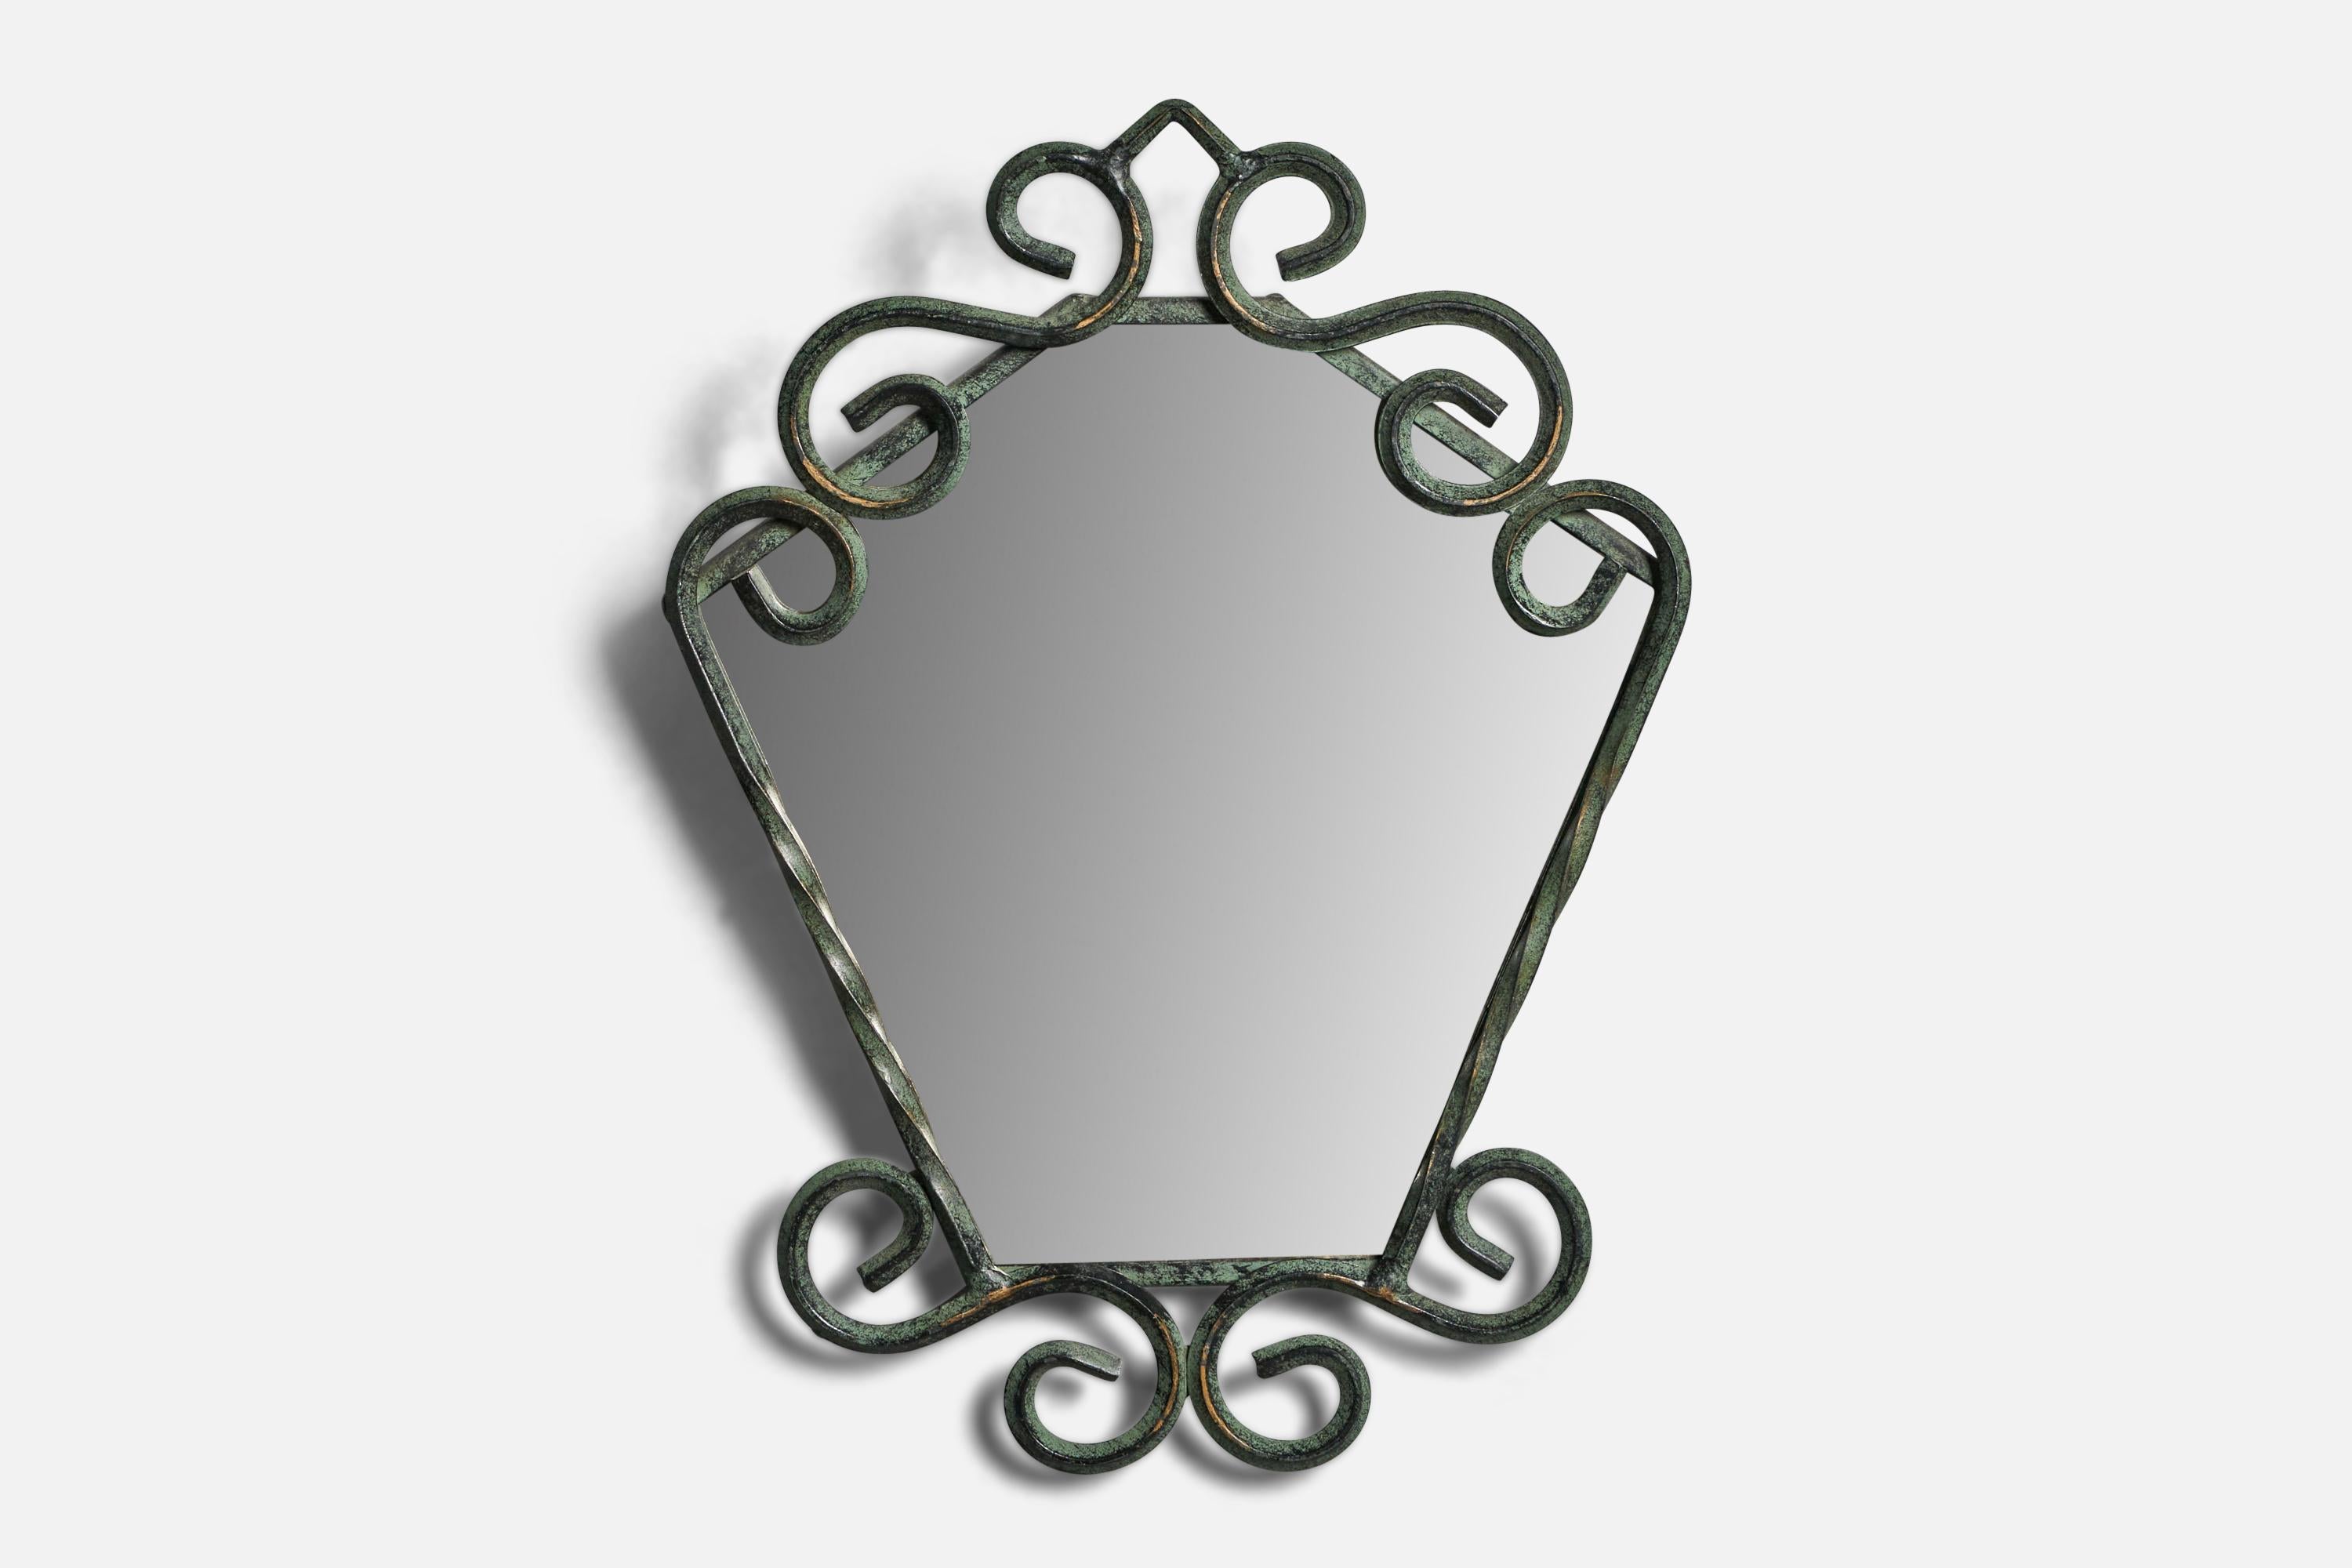 A small wrought iron mirror with bronze finishing designed and produced in Sweden, c. 1970s.